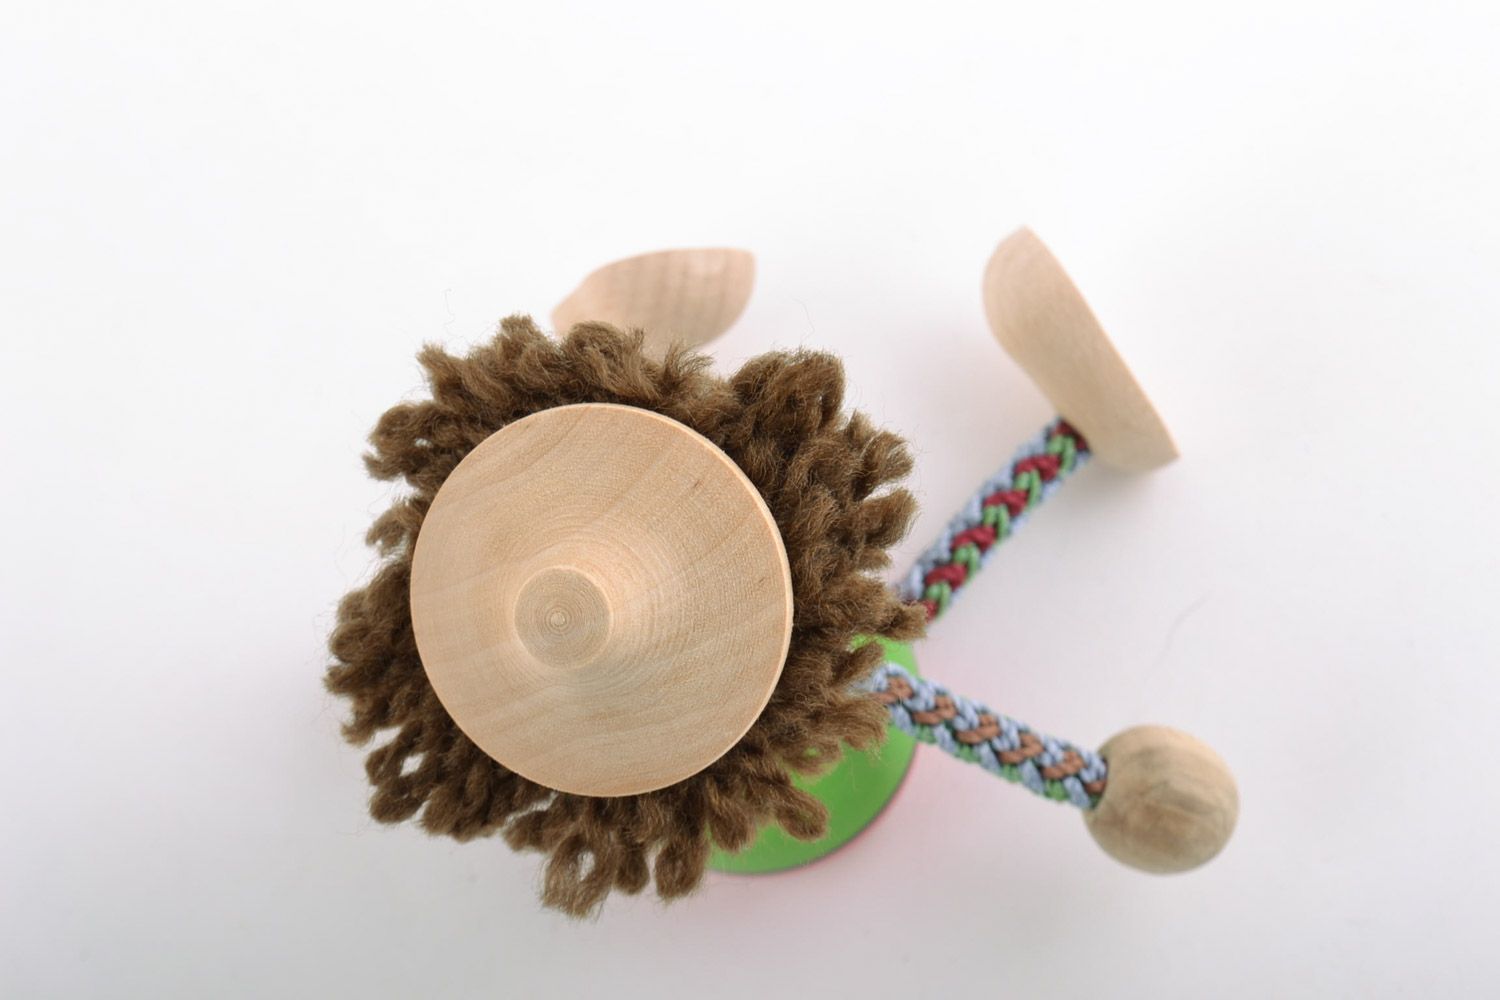 Brightly painted homemade wooden eco toy boy with hat for children and interior photo 4